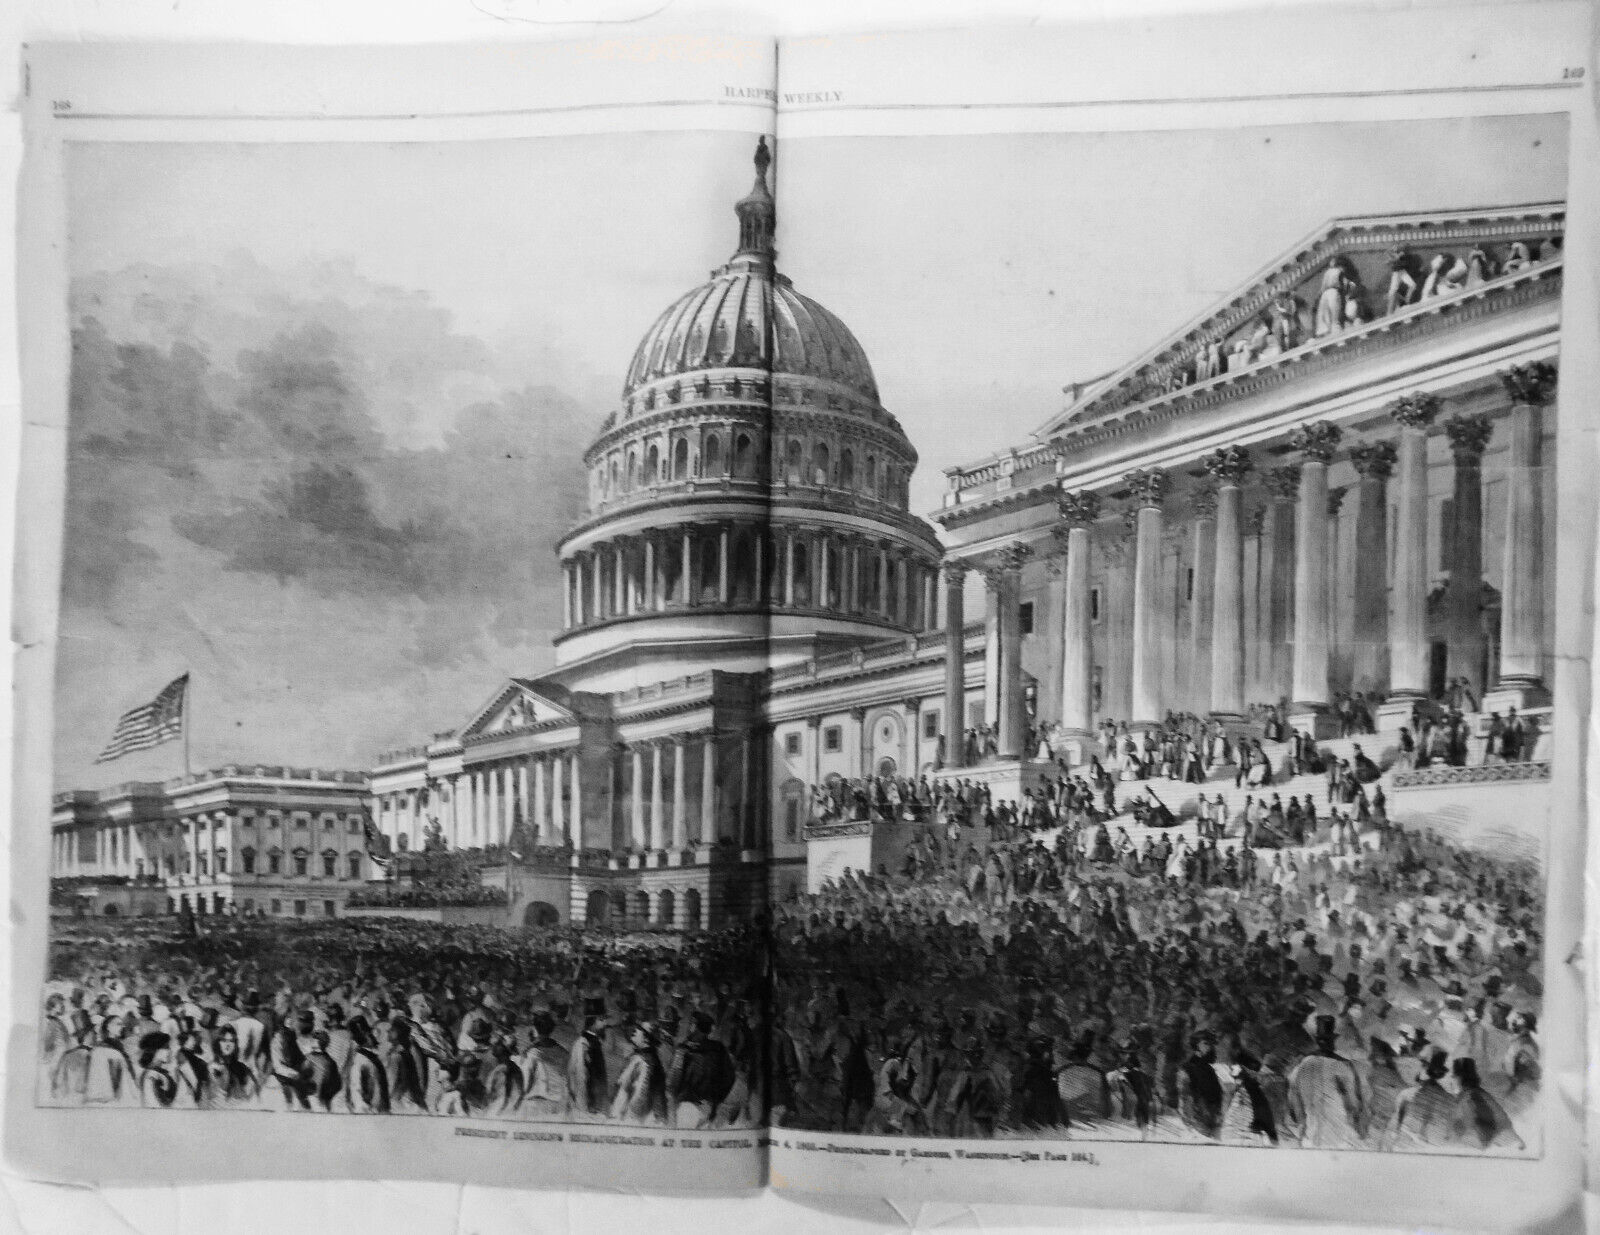 President Lincoln's Reinauguration at the Capitol March 4, 1865 - Original print